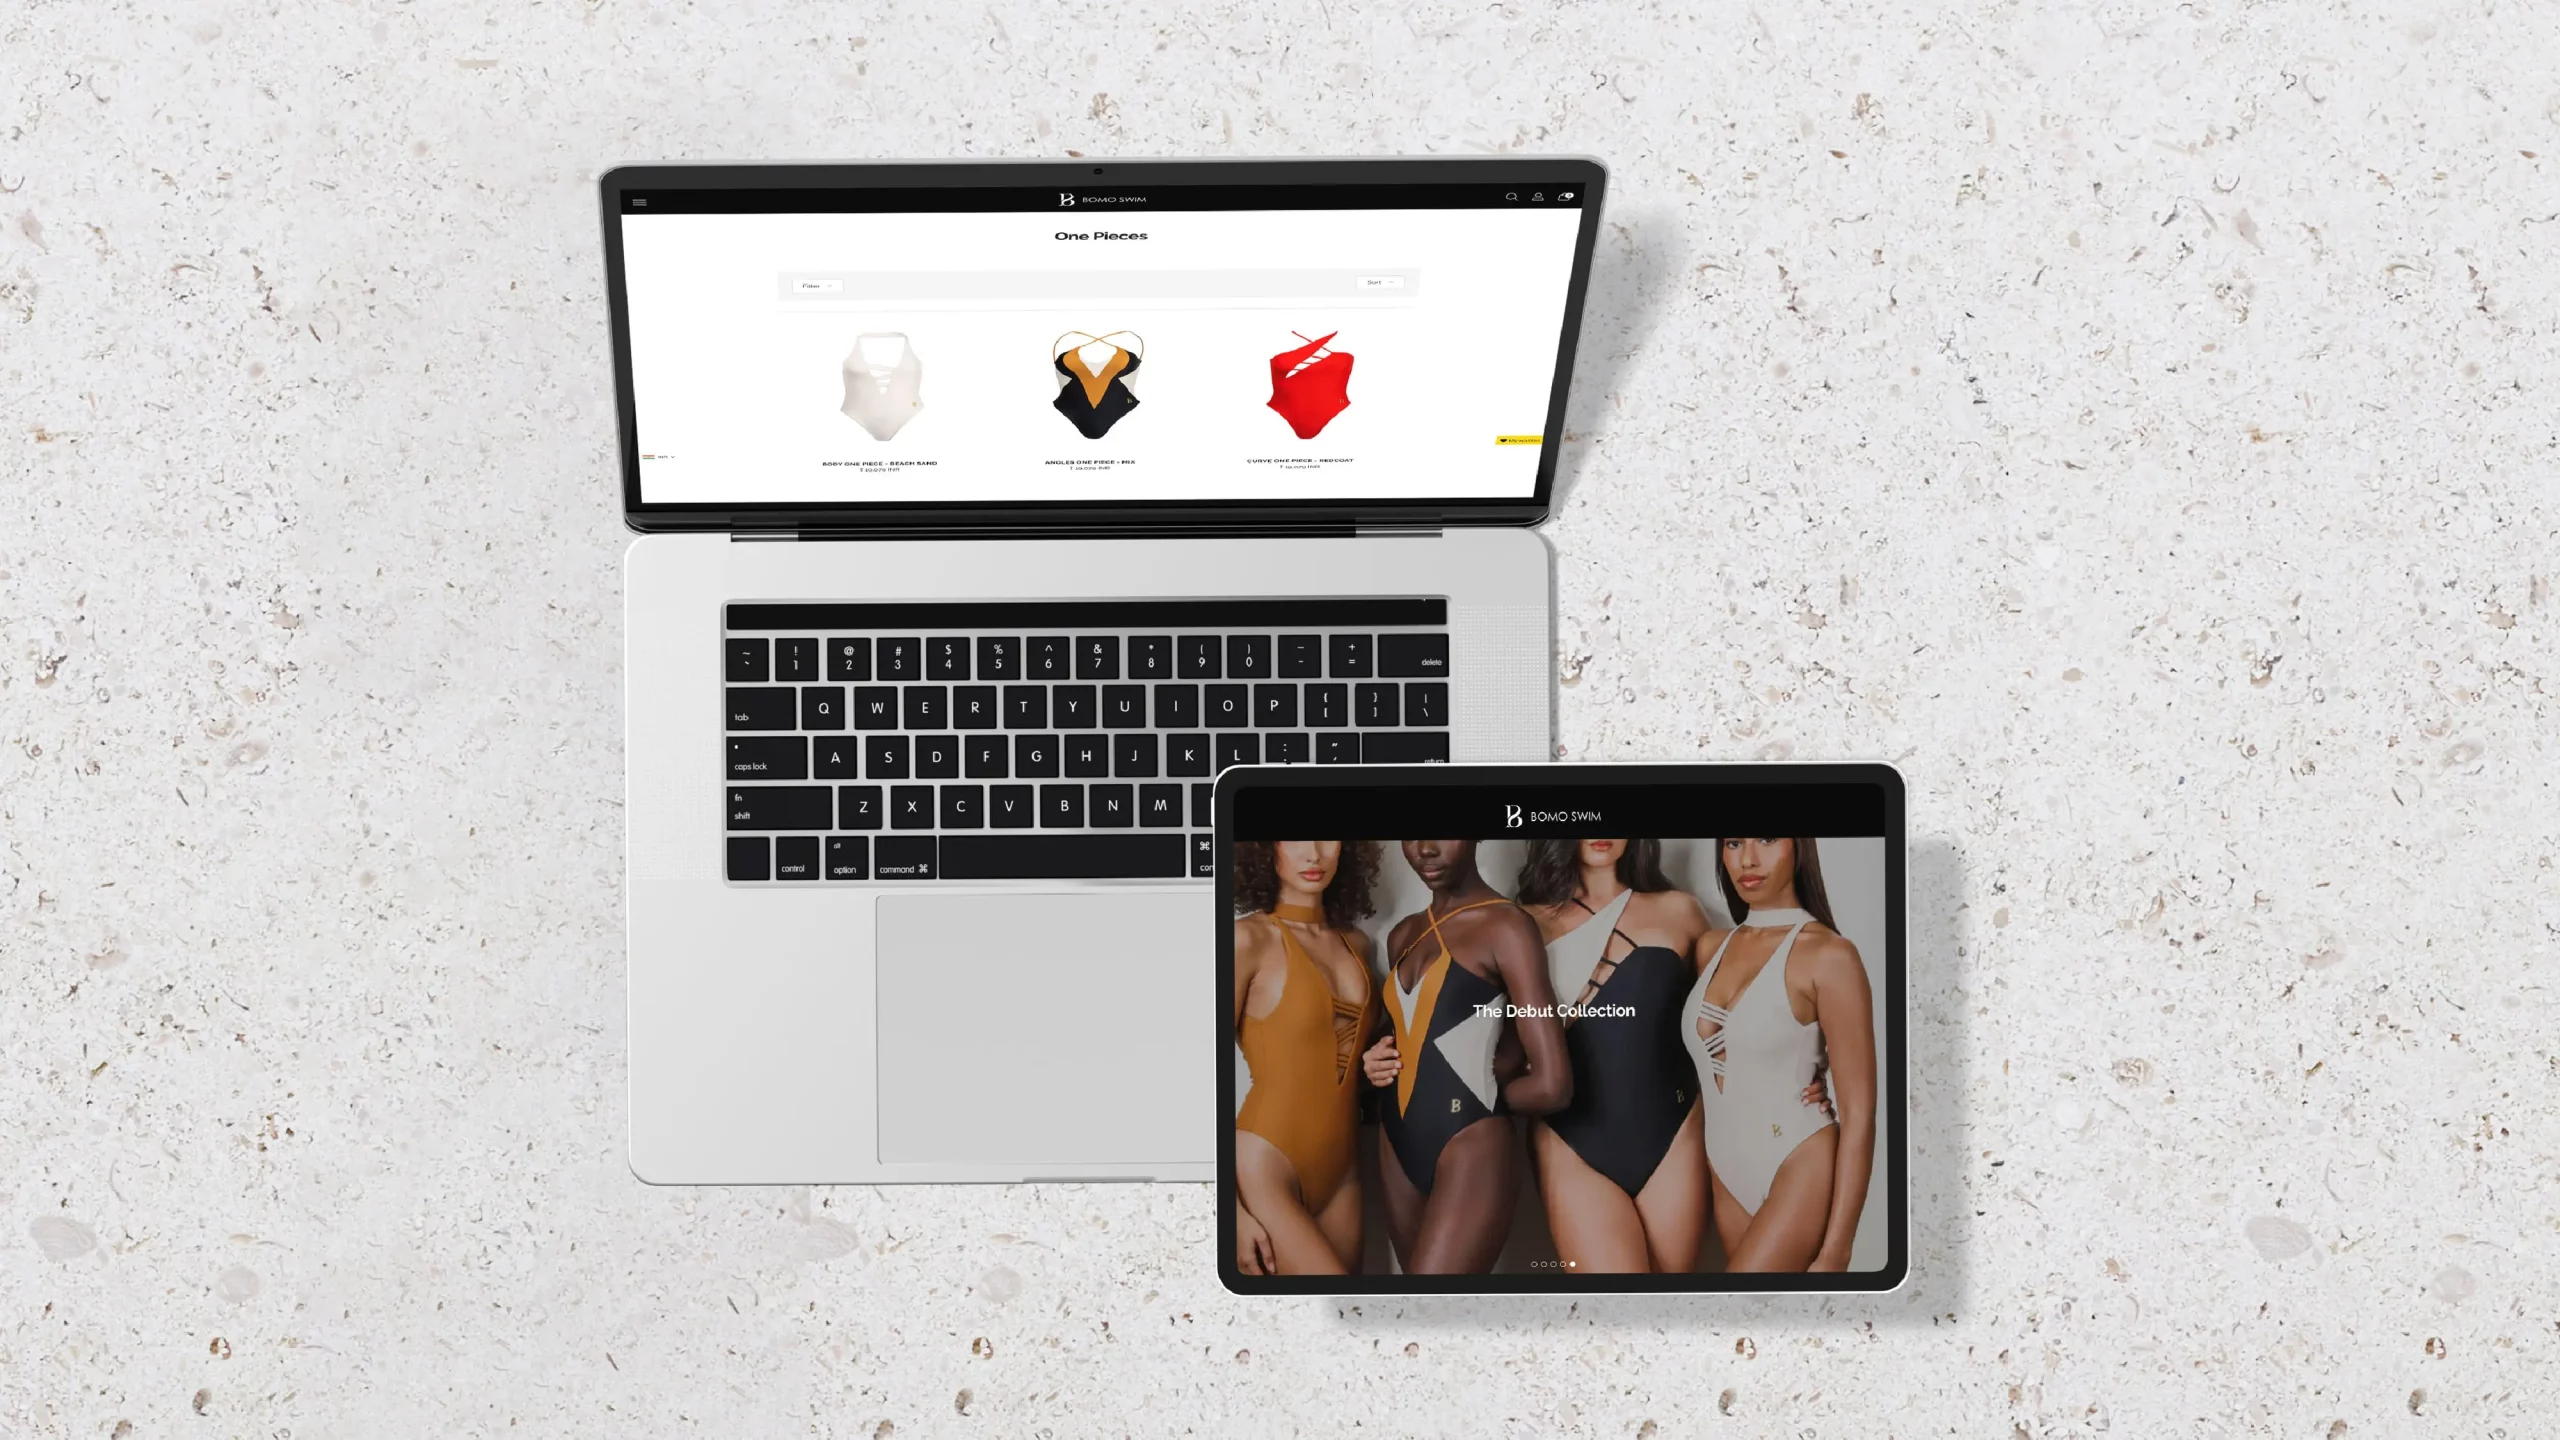 A laptop with a woman's swimsuit on it.